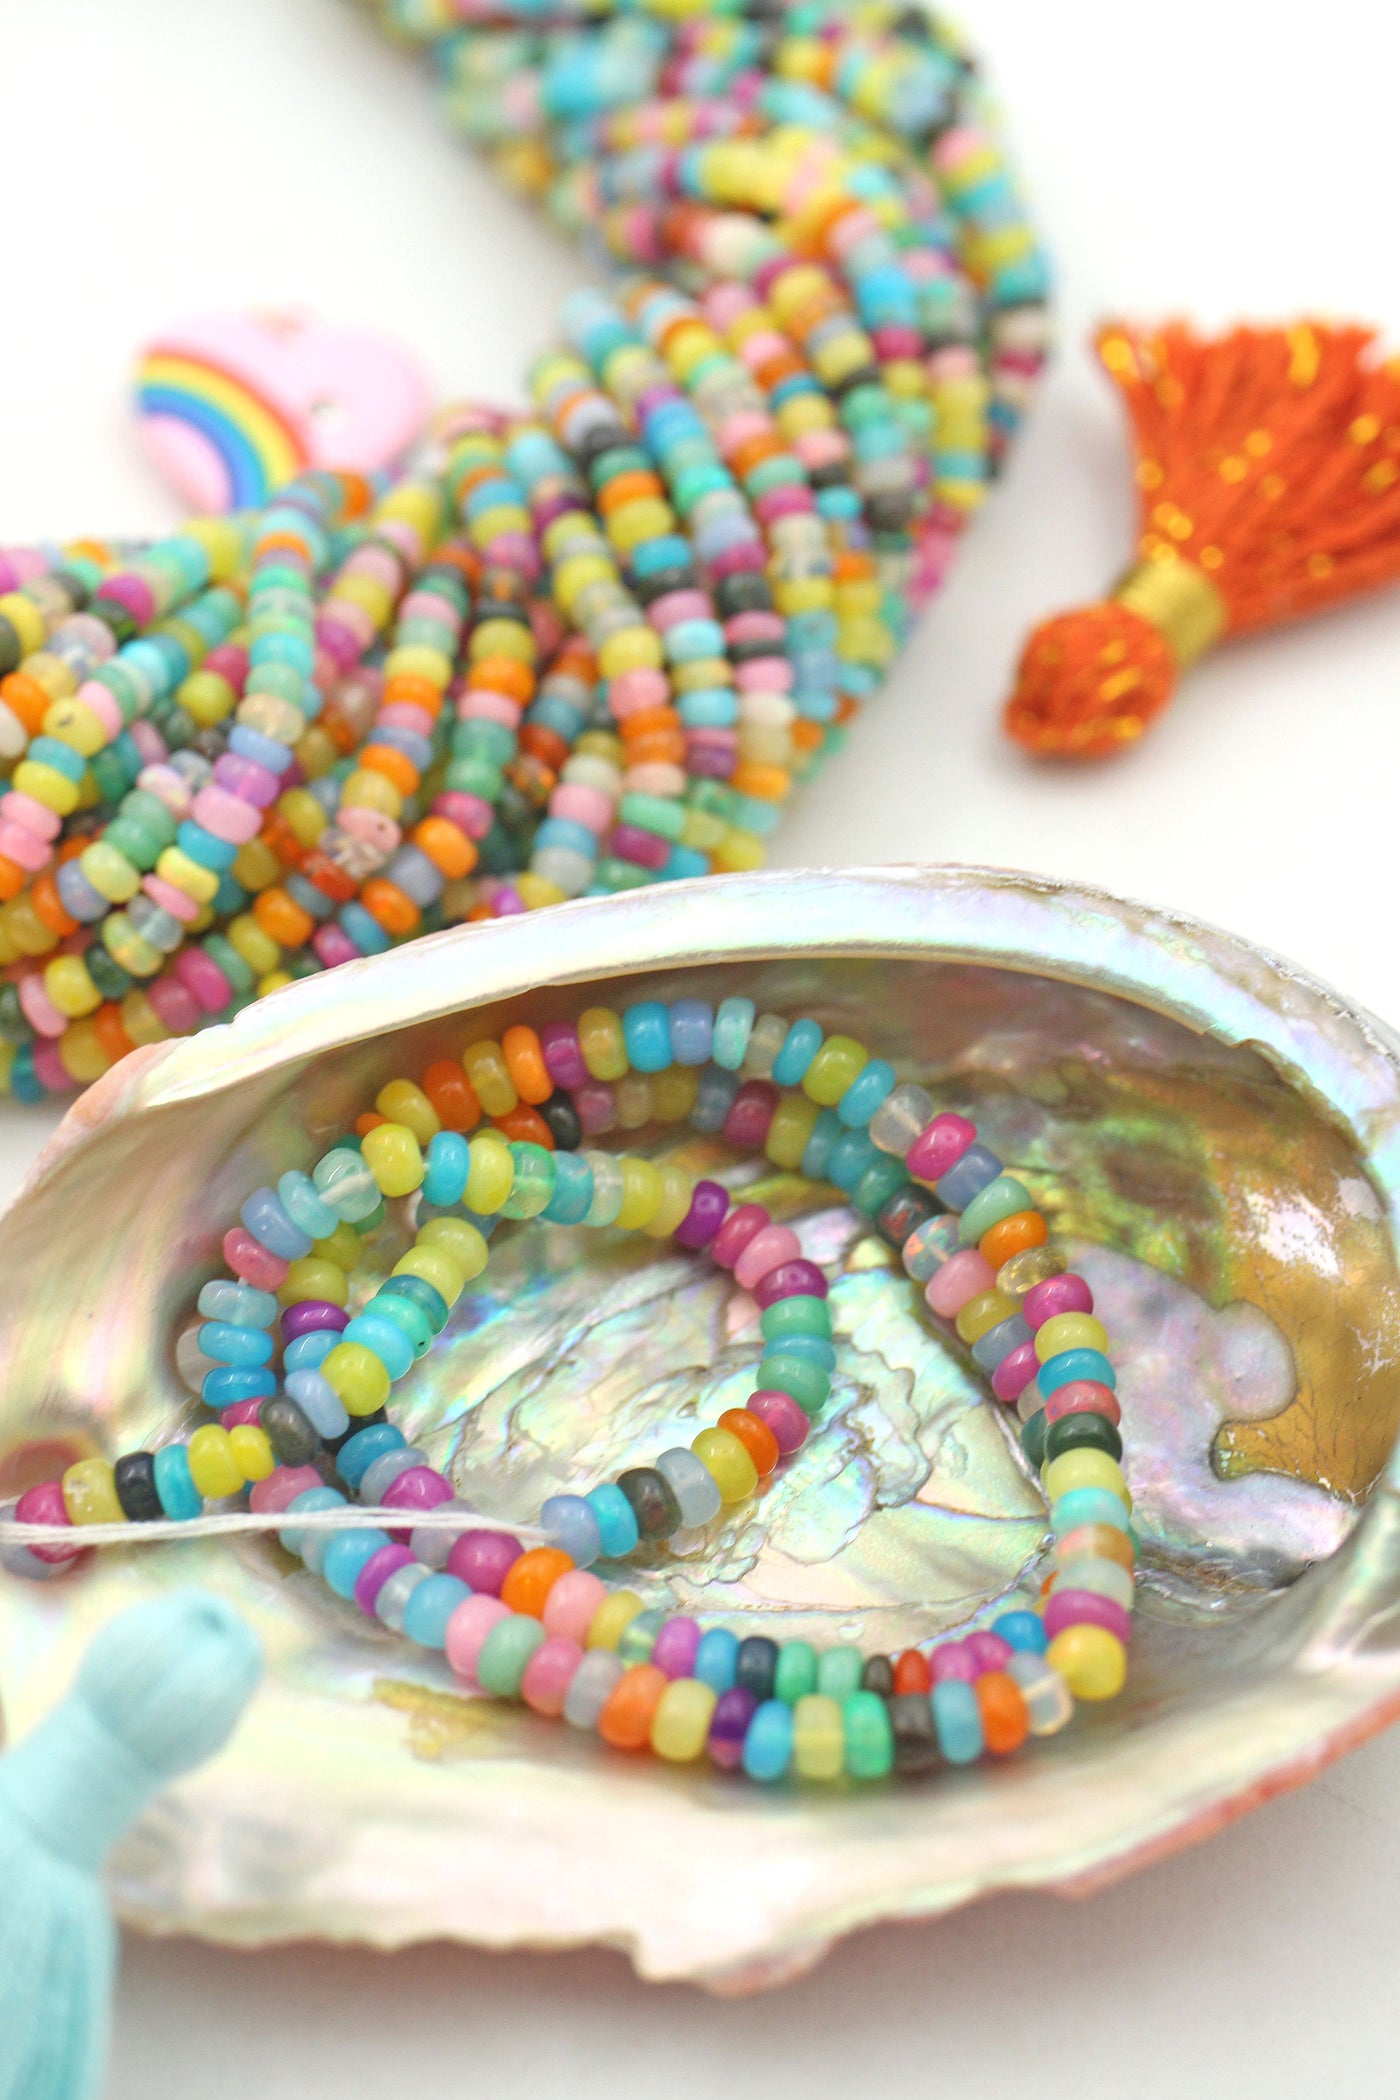 Dyed Rainbow gemstone beads for making colorful necklaces